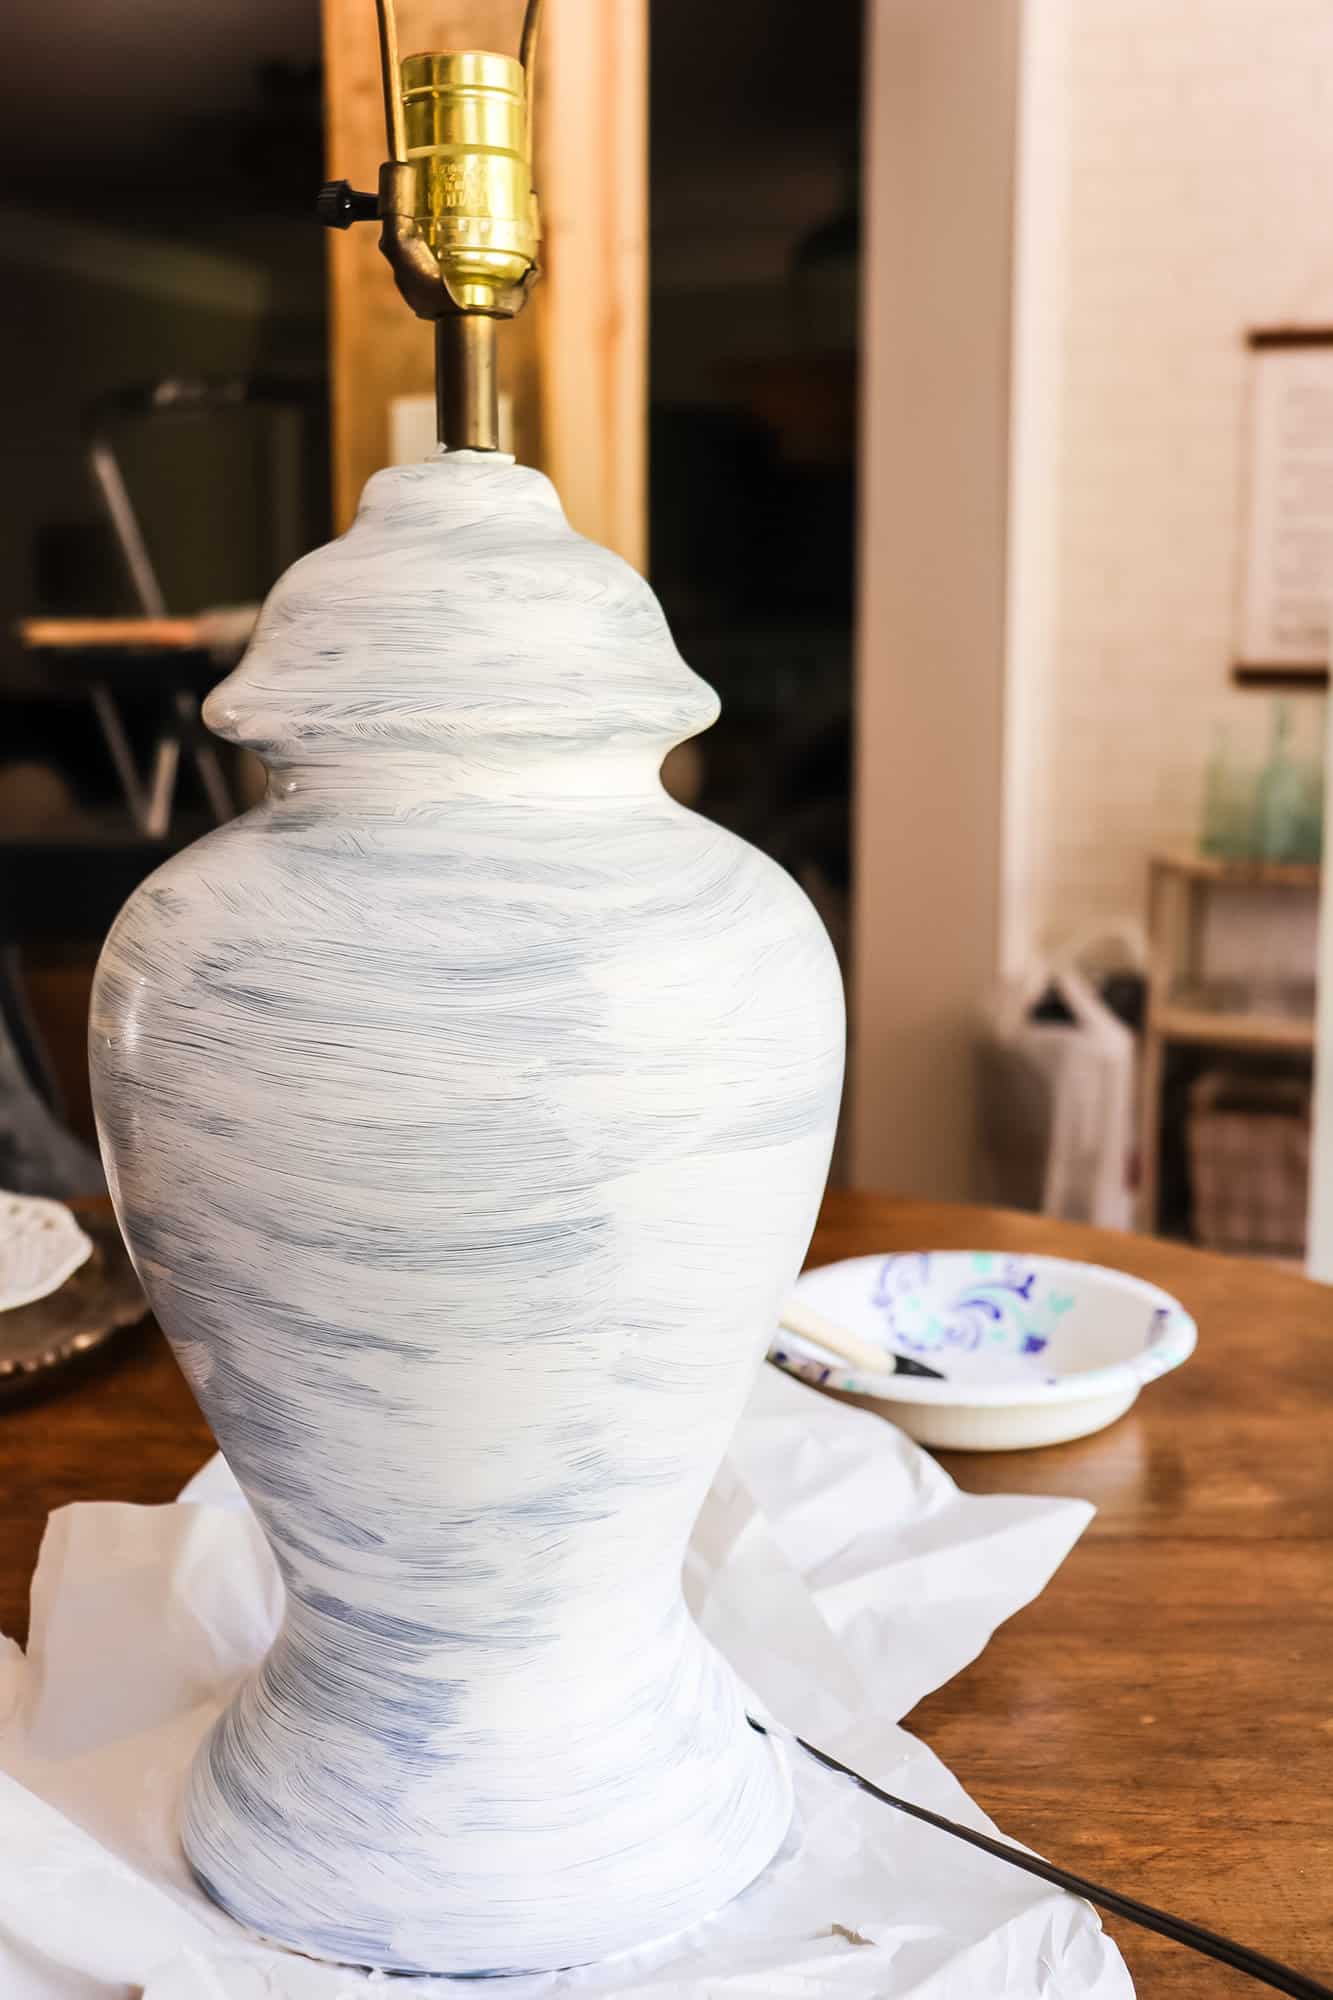 How the Wrong Glue or Cleaner Can Ruin Your Ceramic Lamp